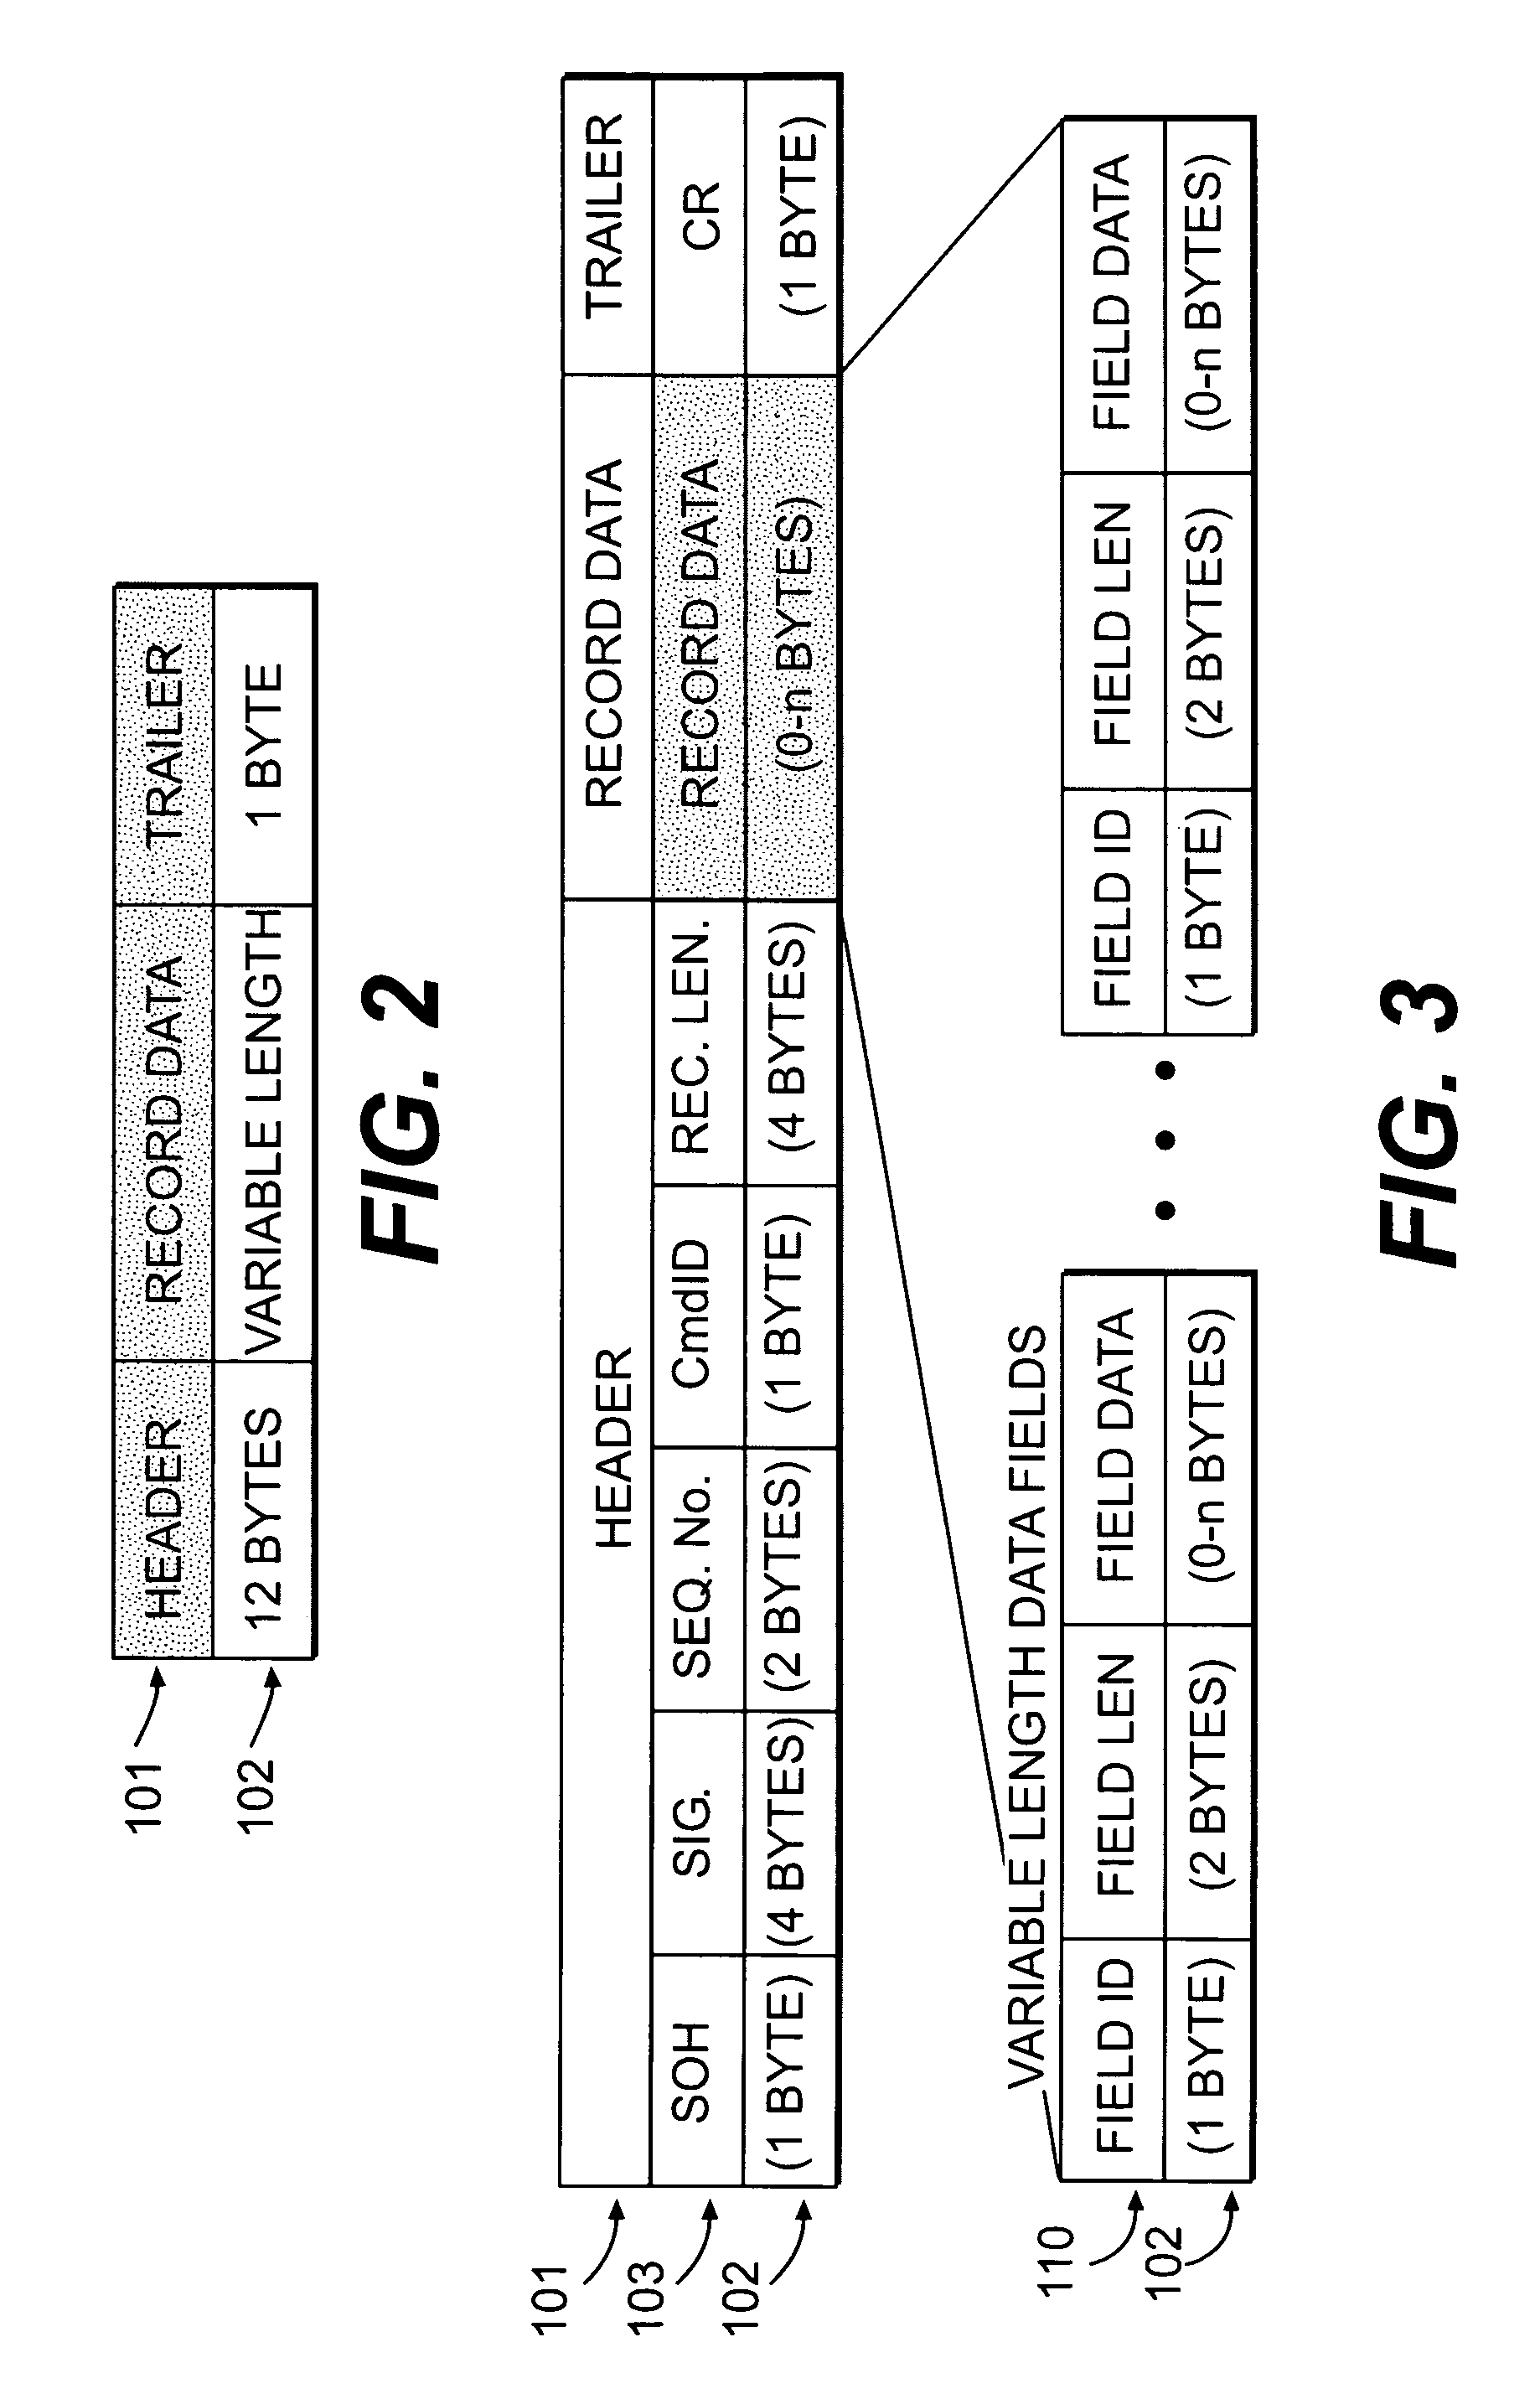 Method and apparatus for discovery and installation of network devices through a network